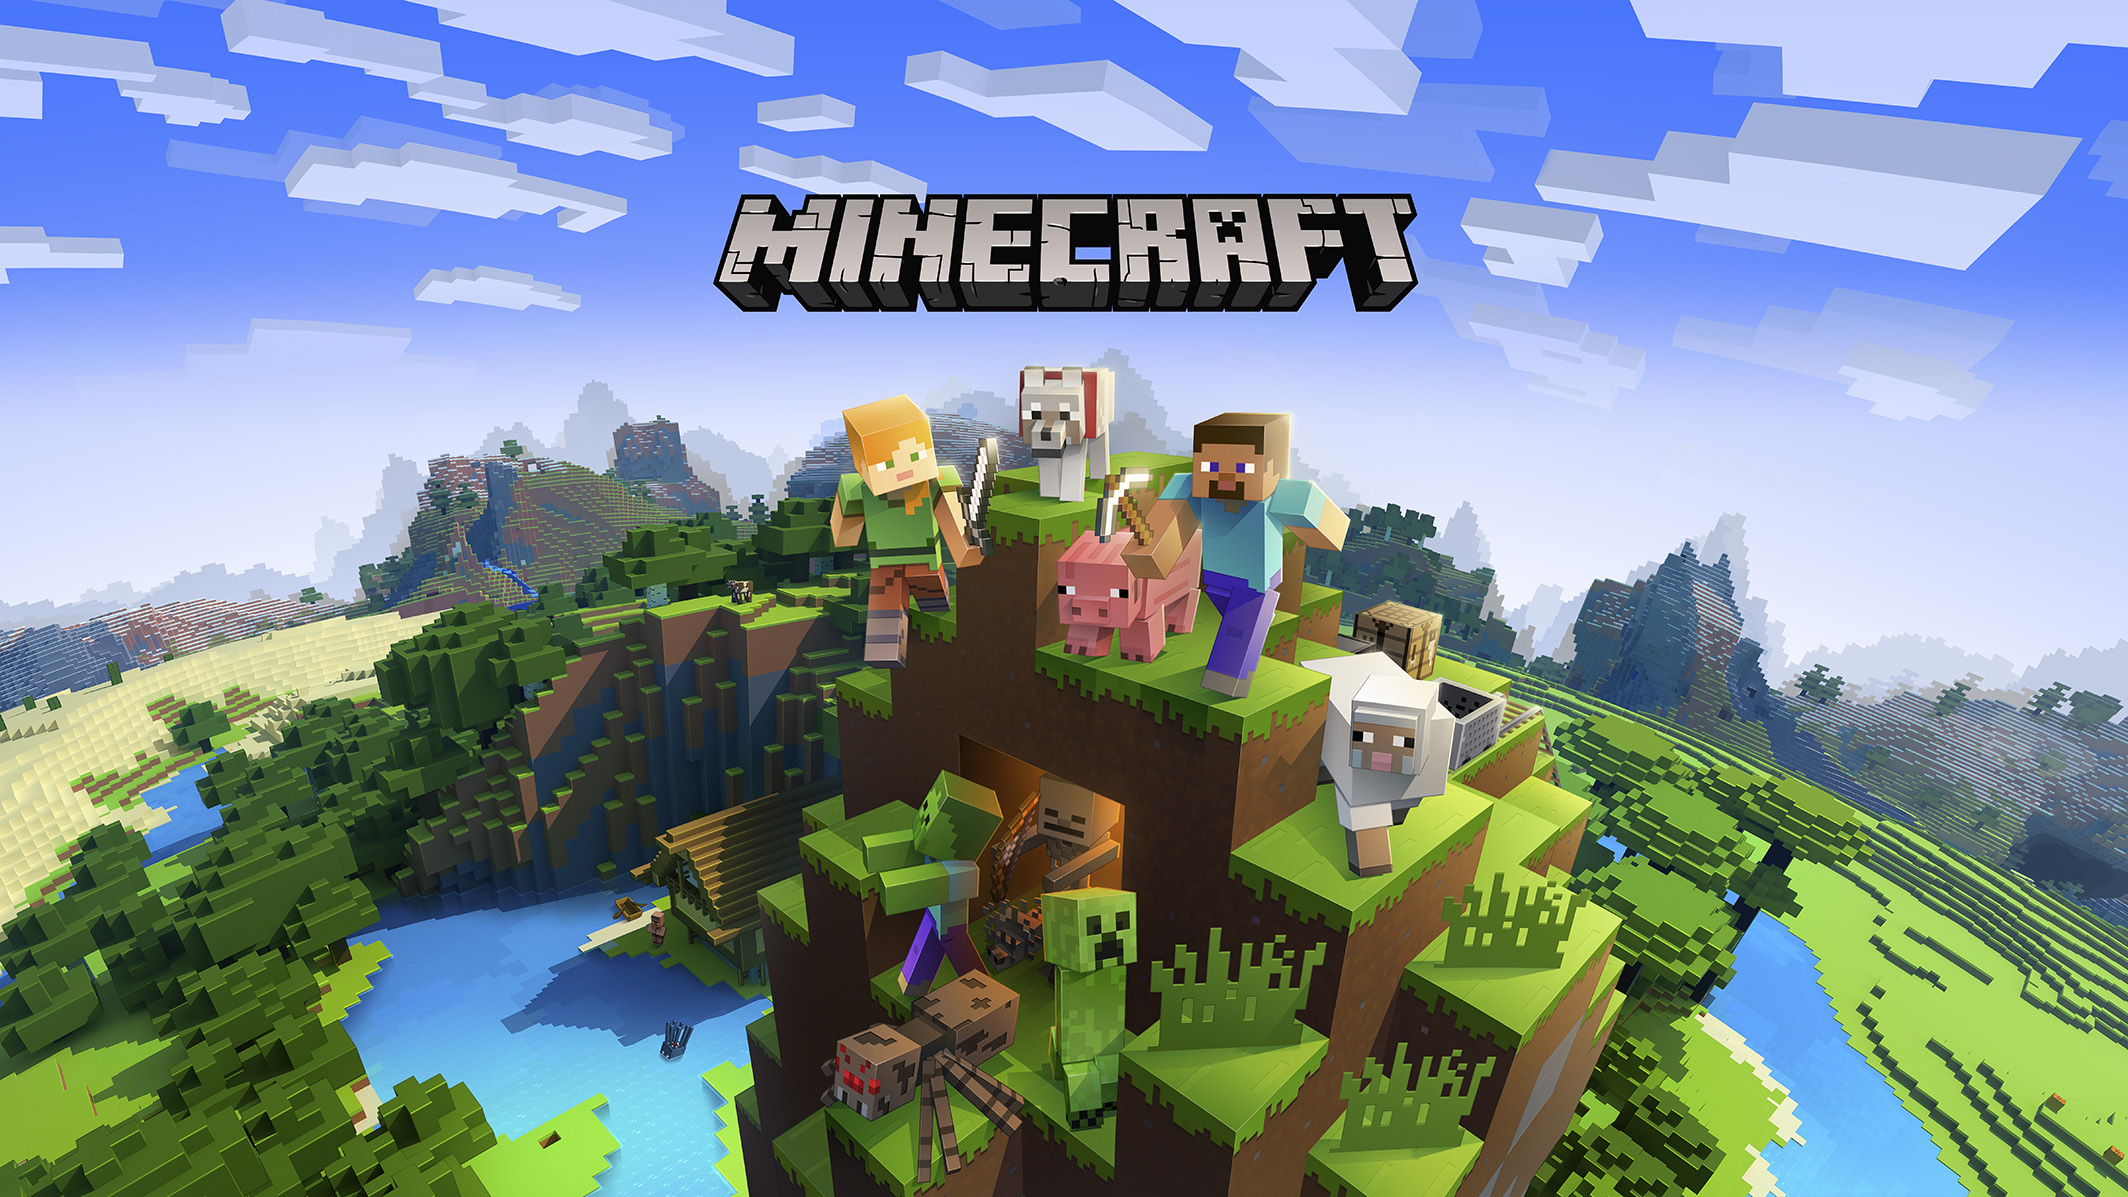 Illustration of Minecraft characters on top of a mountain created in the style of Minecraft games. Image courtesy of Microsoft.